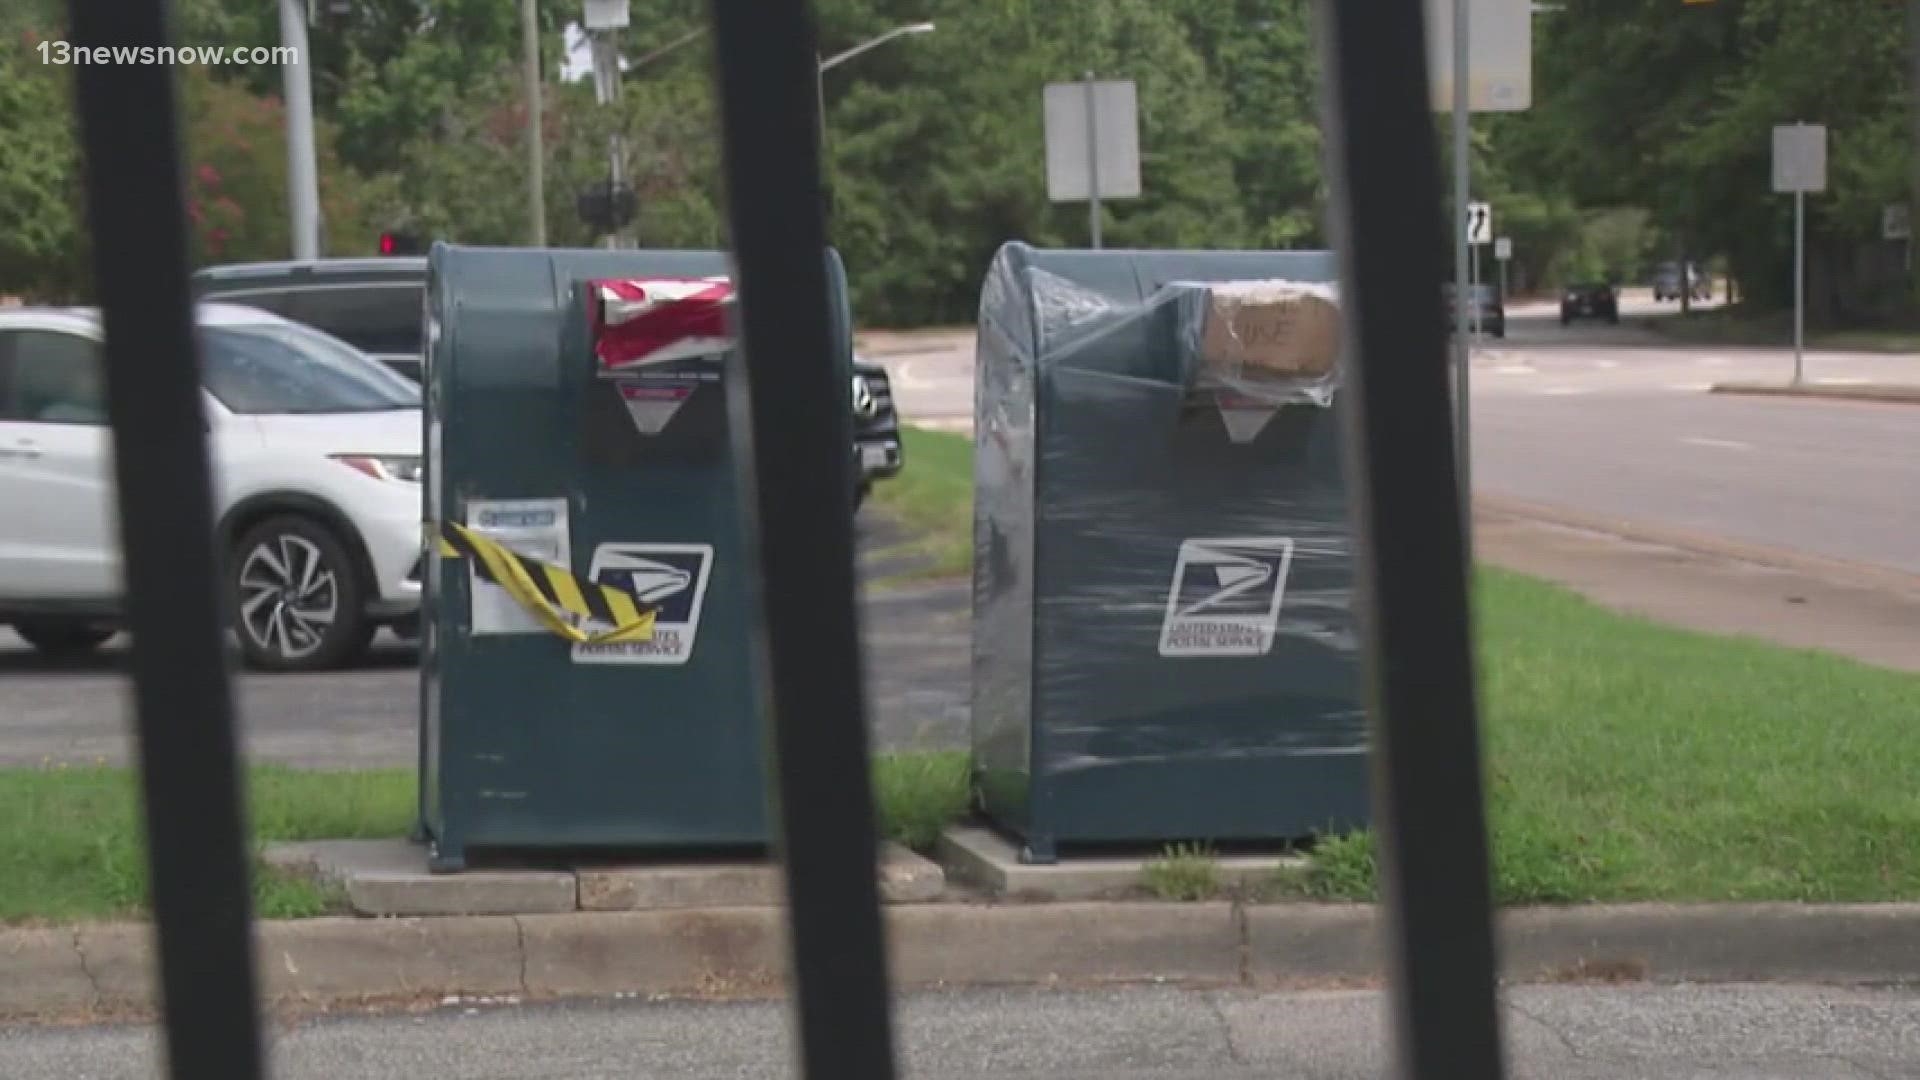 People in Virginia Beach say they believe someone is breaking into the USPS mailboxes and stealing letters and checks right out of them.